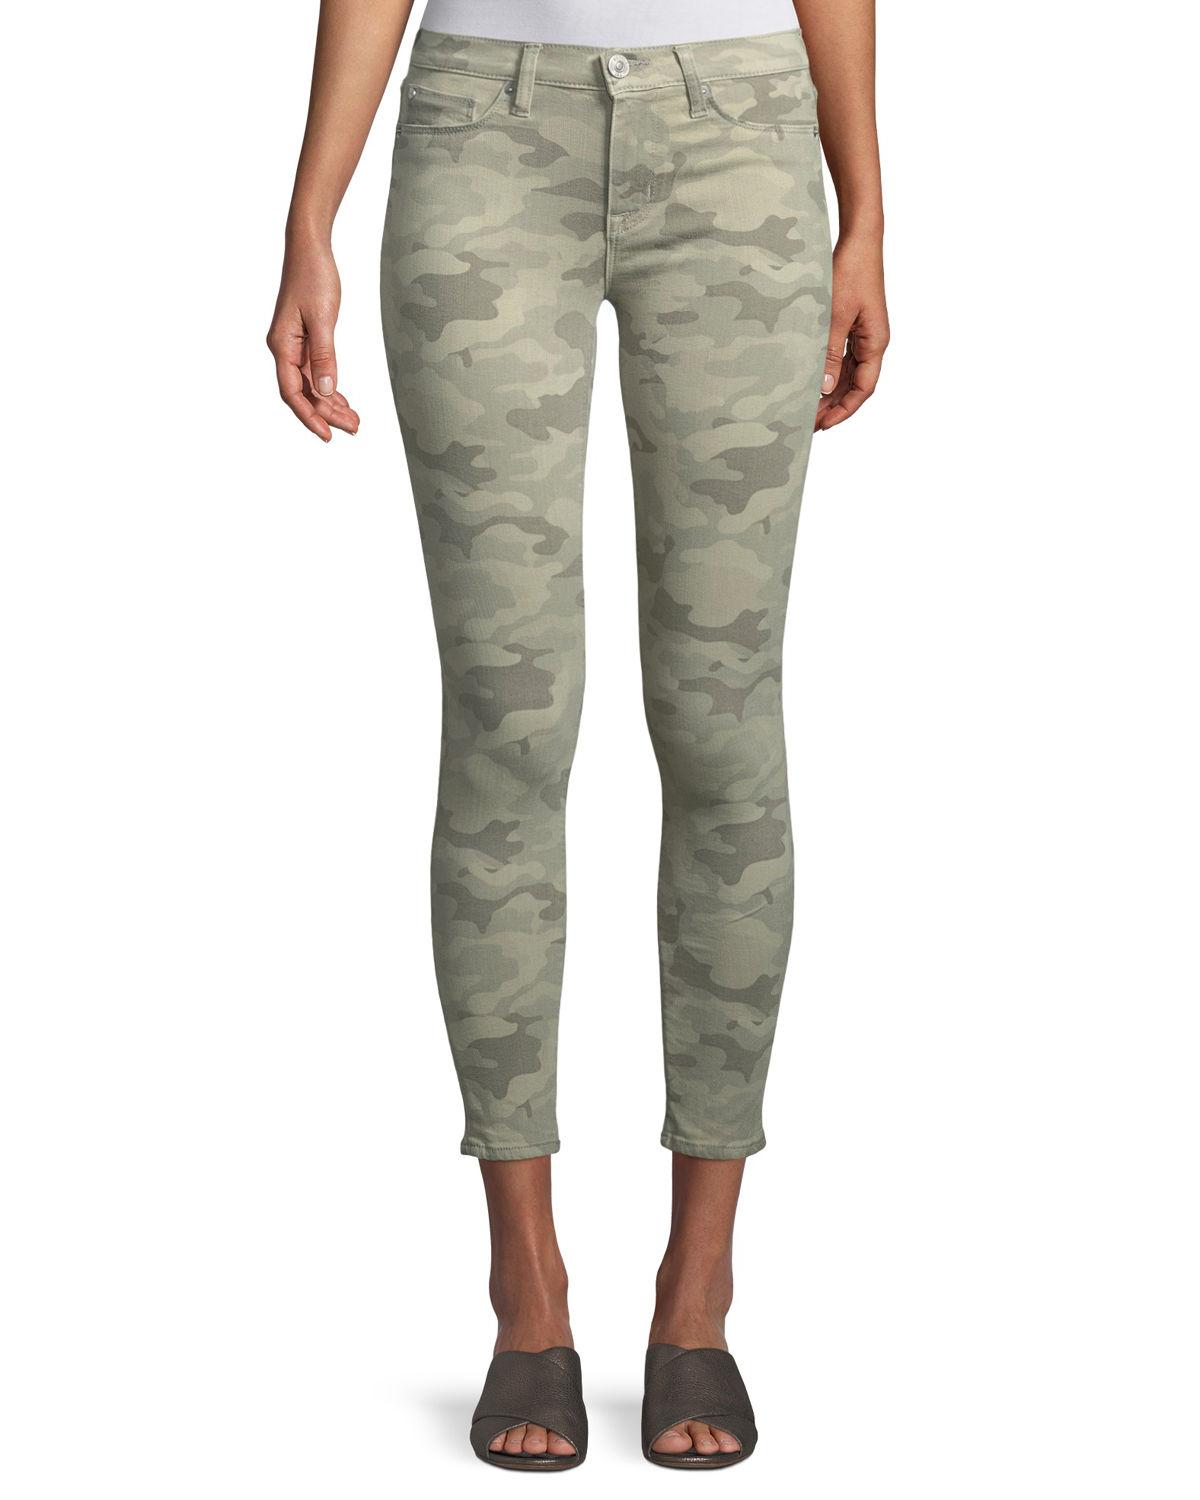 Lyst - Hudson Jeans Nico Mid-rise Super Skinny Jeans in Green